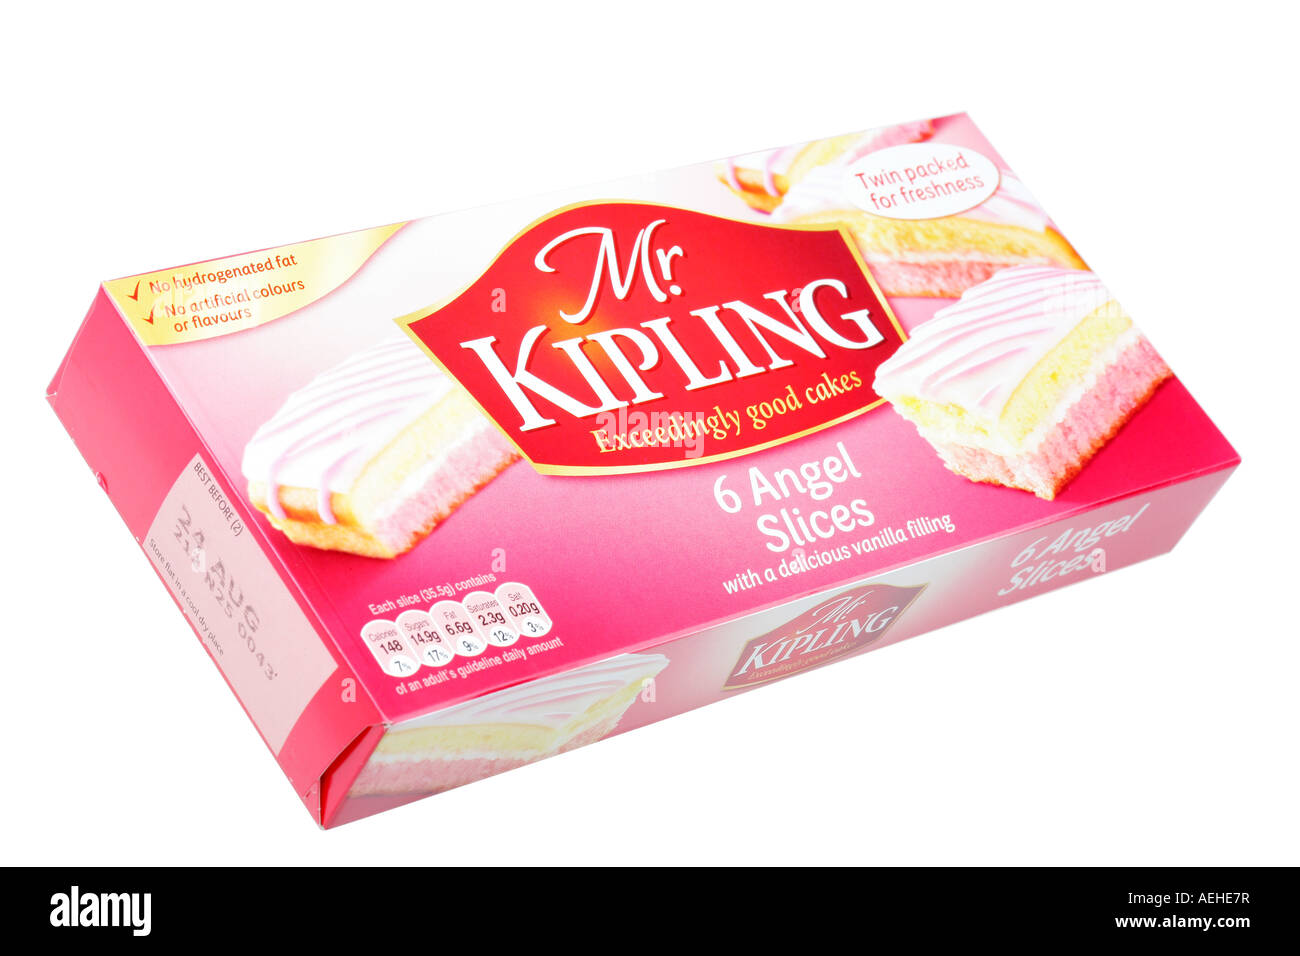 Mr kipling angel slices Cut Out Stock Images & Pictures - Alamy